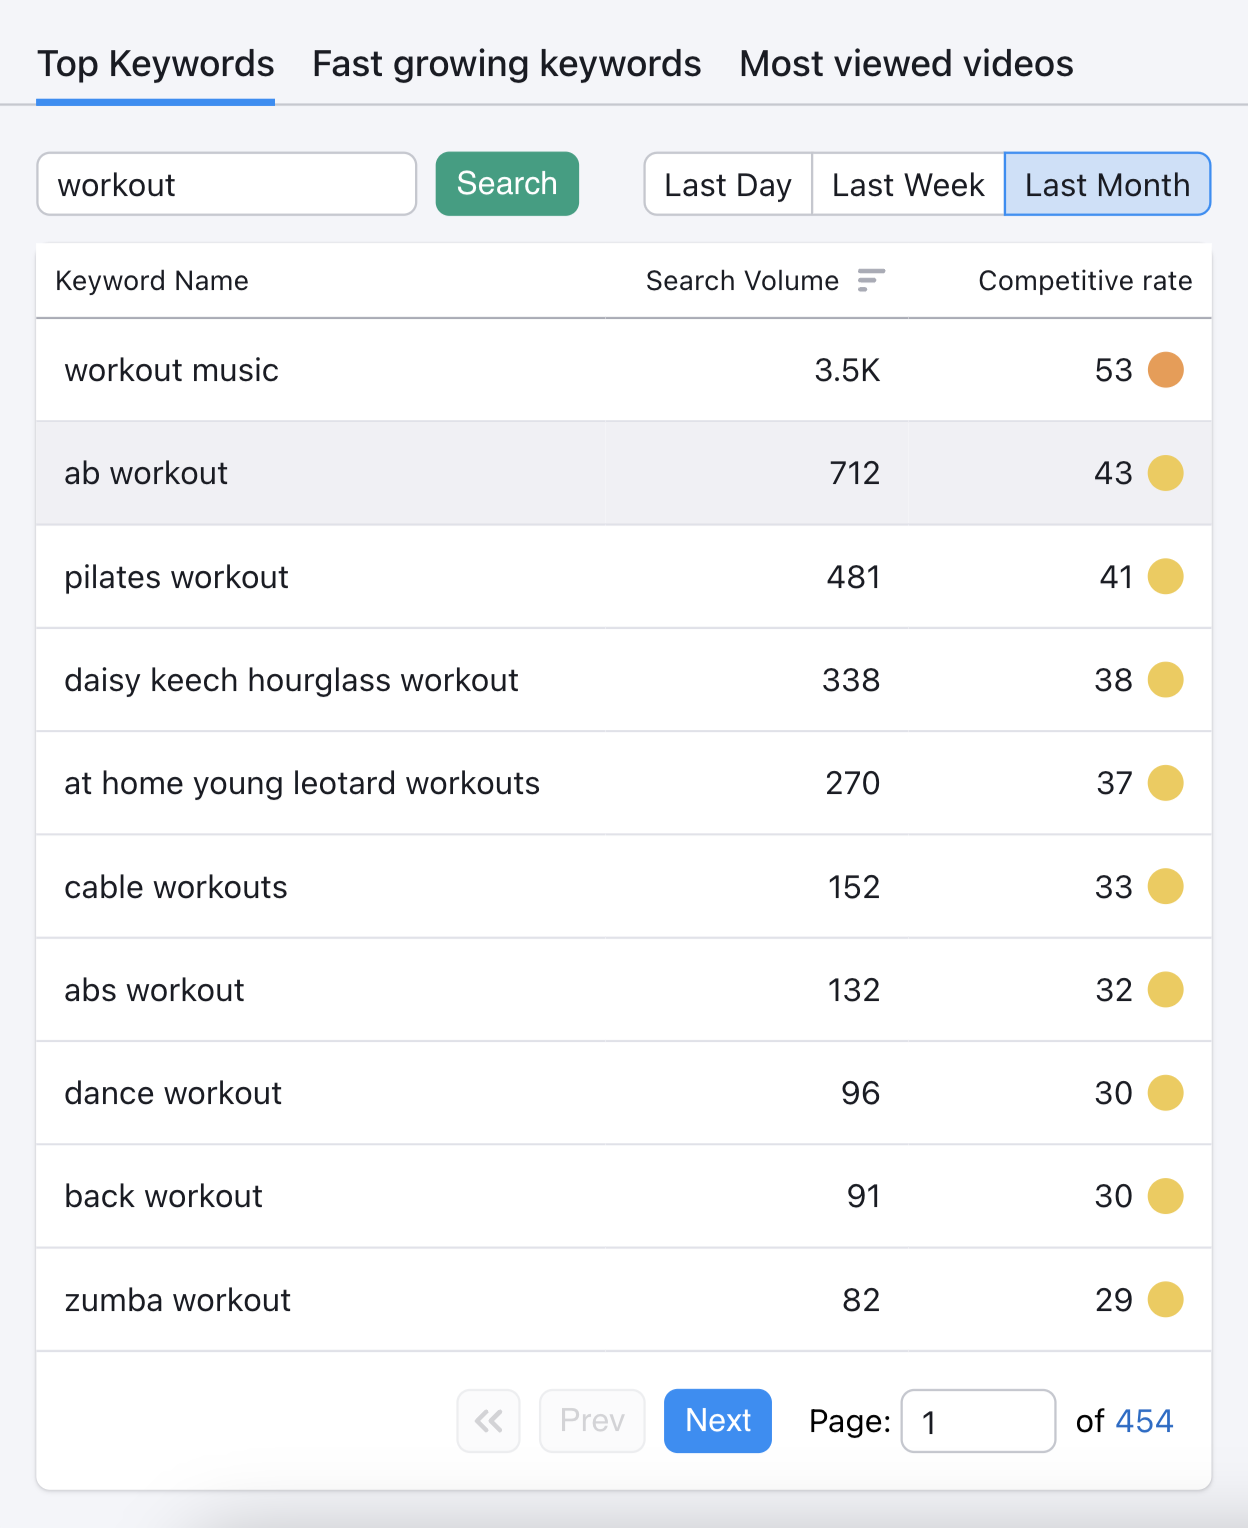 "Top Keywords" related to "workout" search